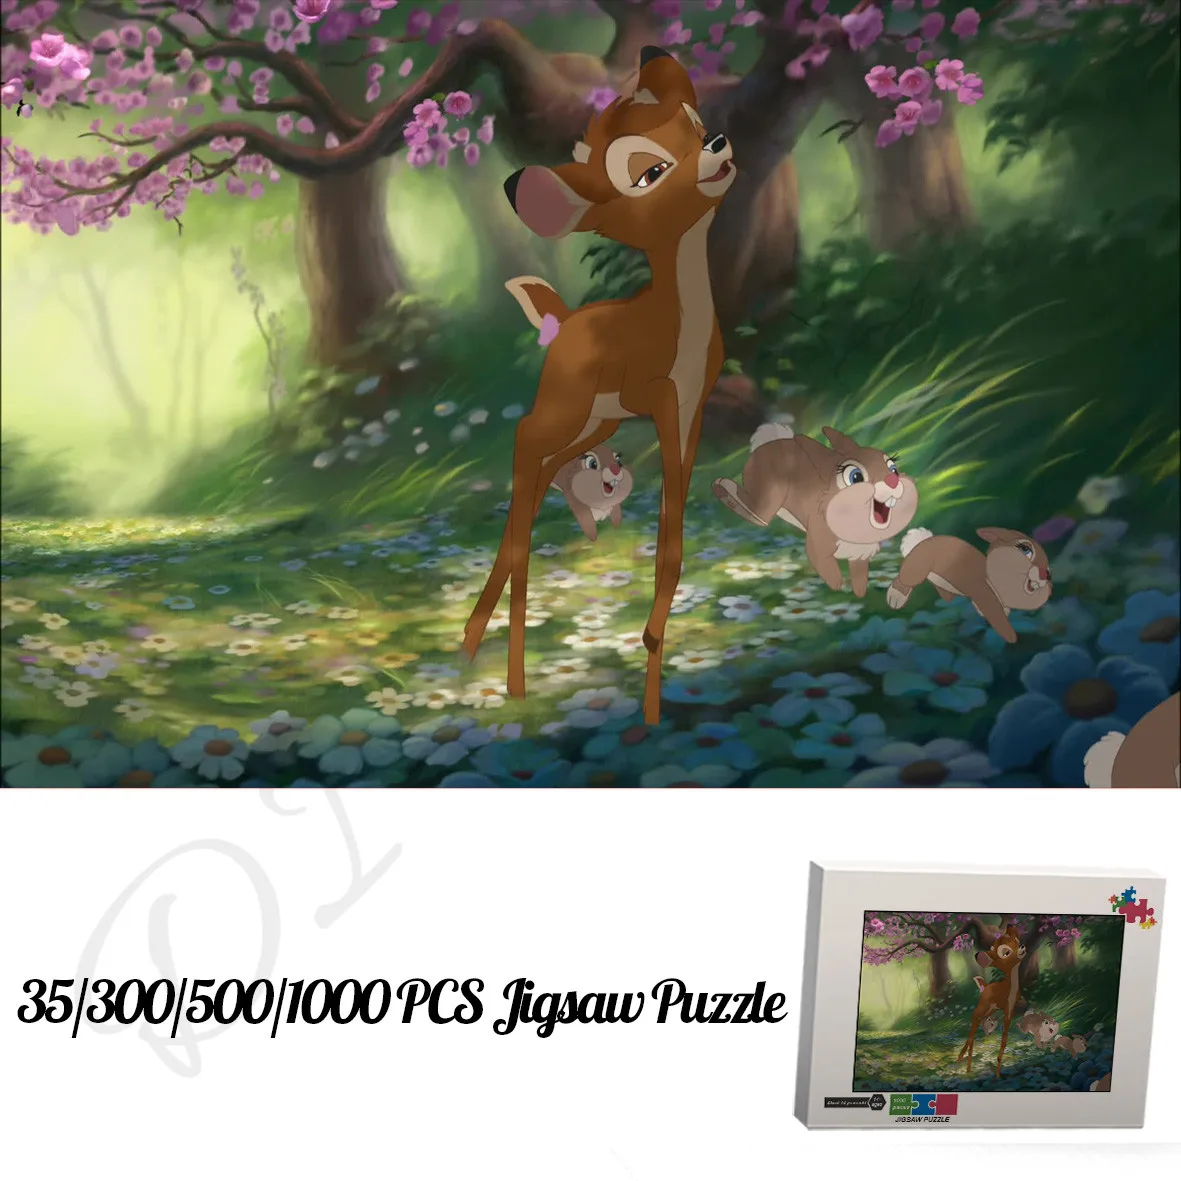 Bambi 35 300 500 1000 Pieces Jigsaw Puzzles Disney Cartoon Animation Wooden and Box Puzzles for Kids Decompressed Funny Toys bambi cartoon puzzles for kids disney feature length animation 35 300 500 1000 pieces of wooden jigsaw puzzles toys and hobbies